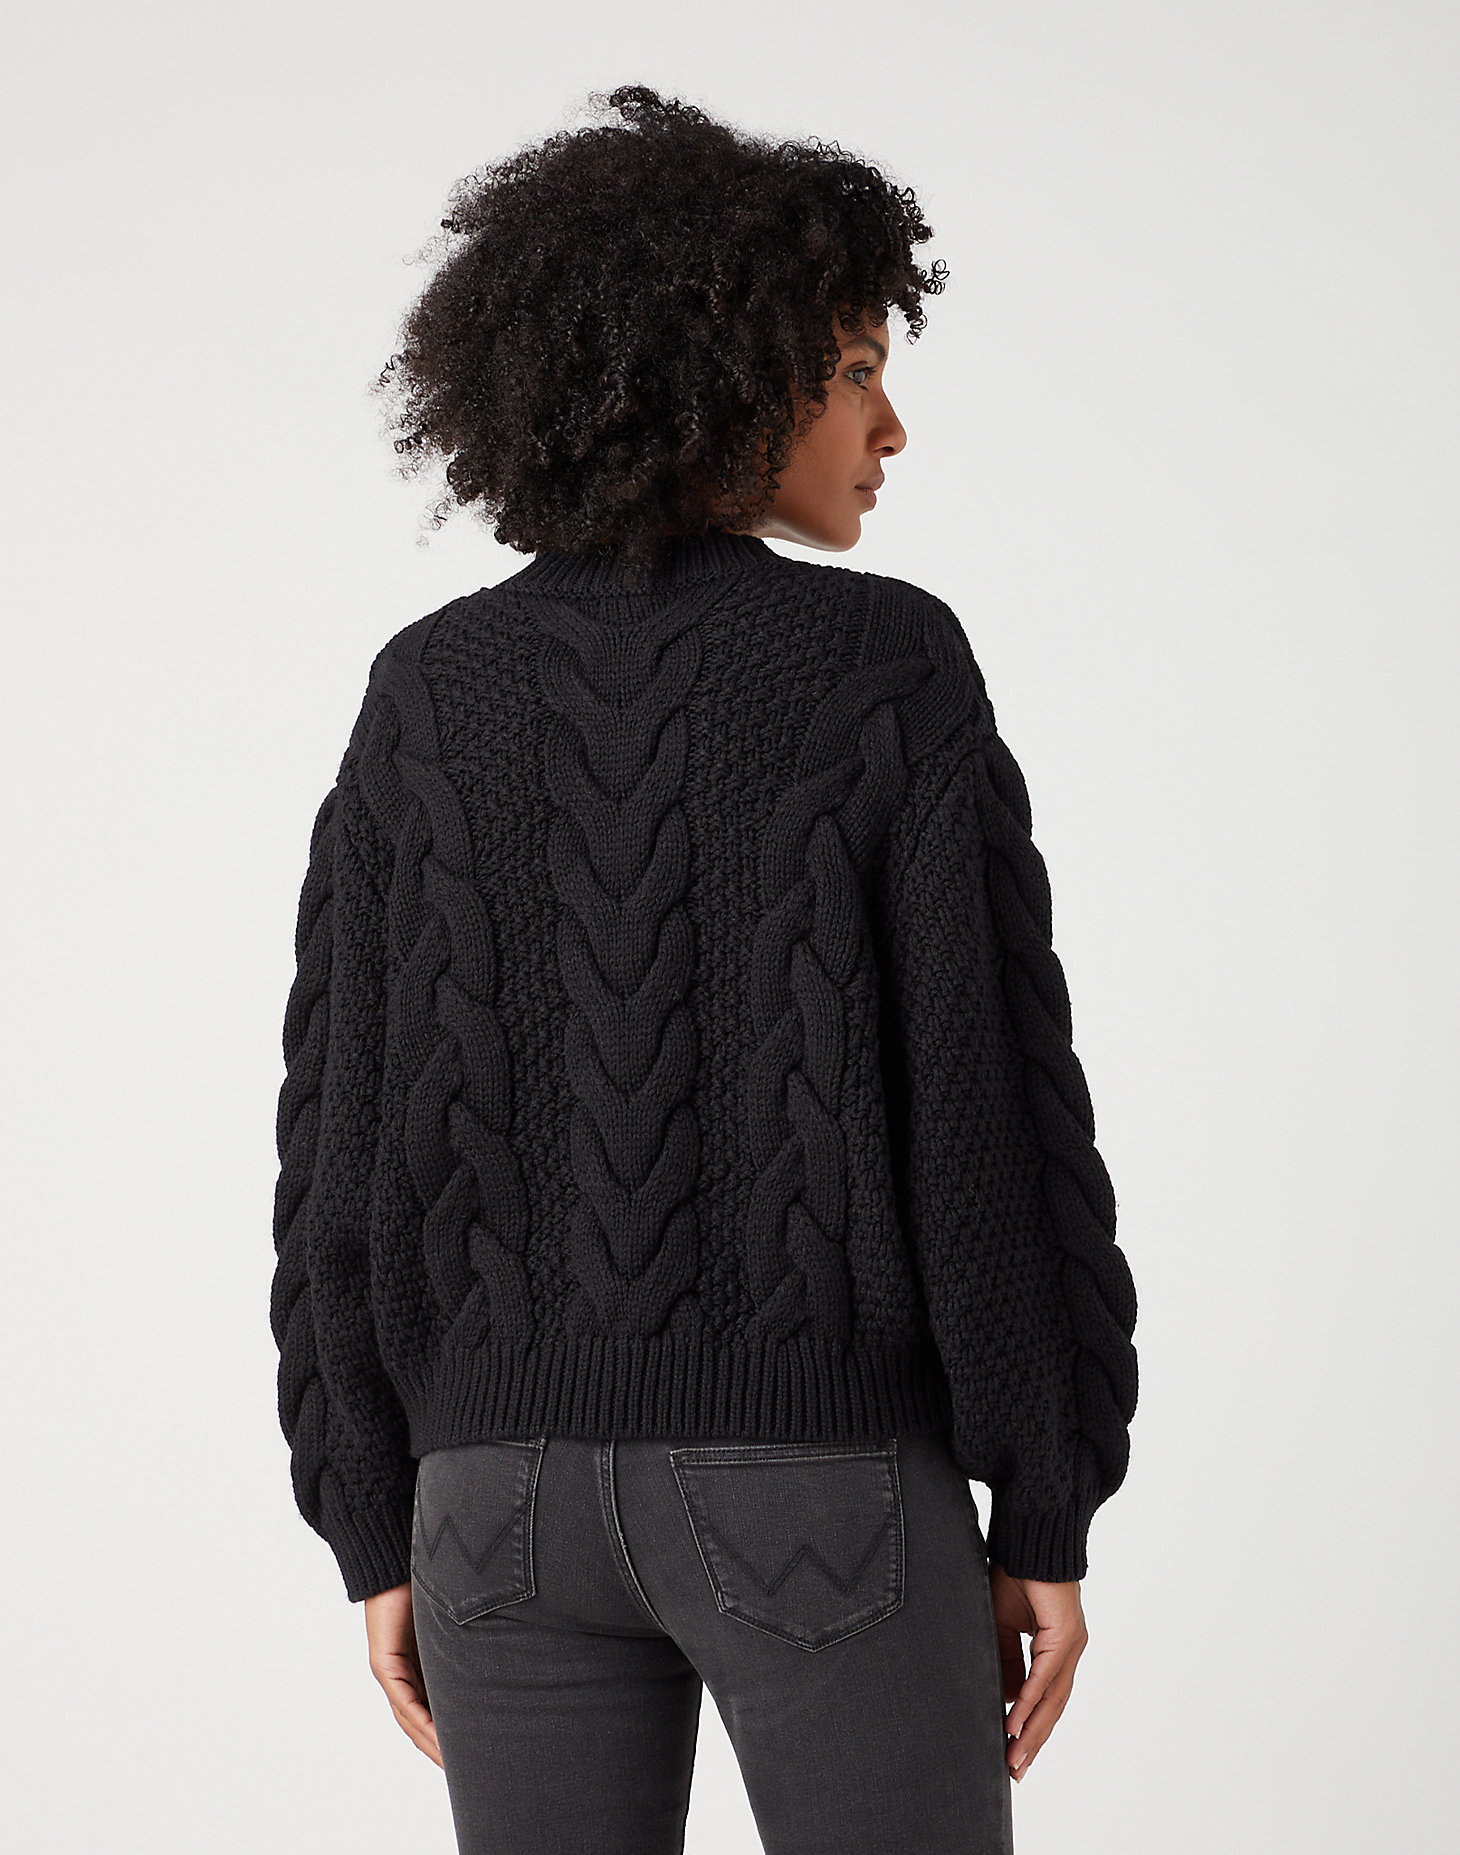 Crew Neck Cable Knit in Black alternative view 2